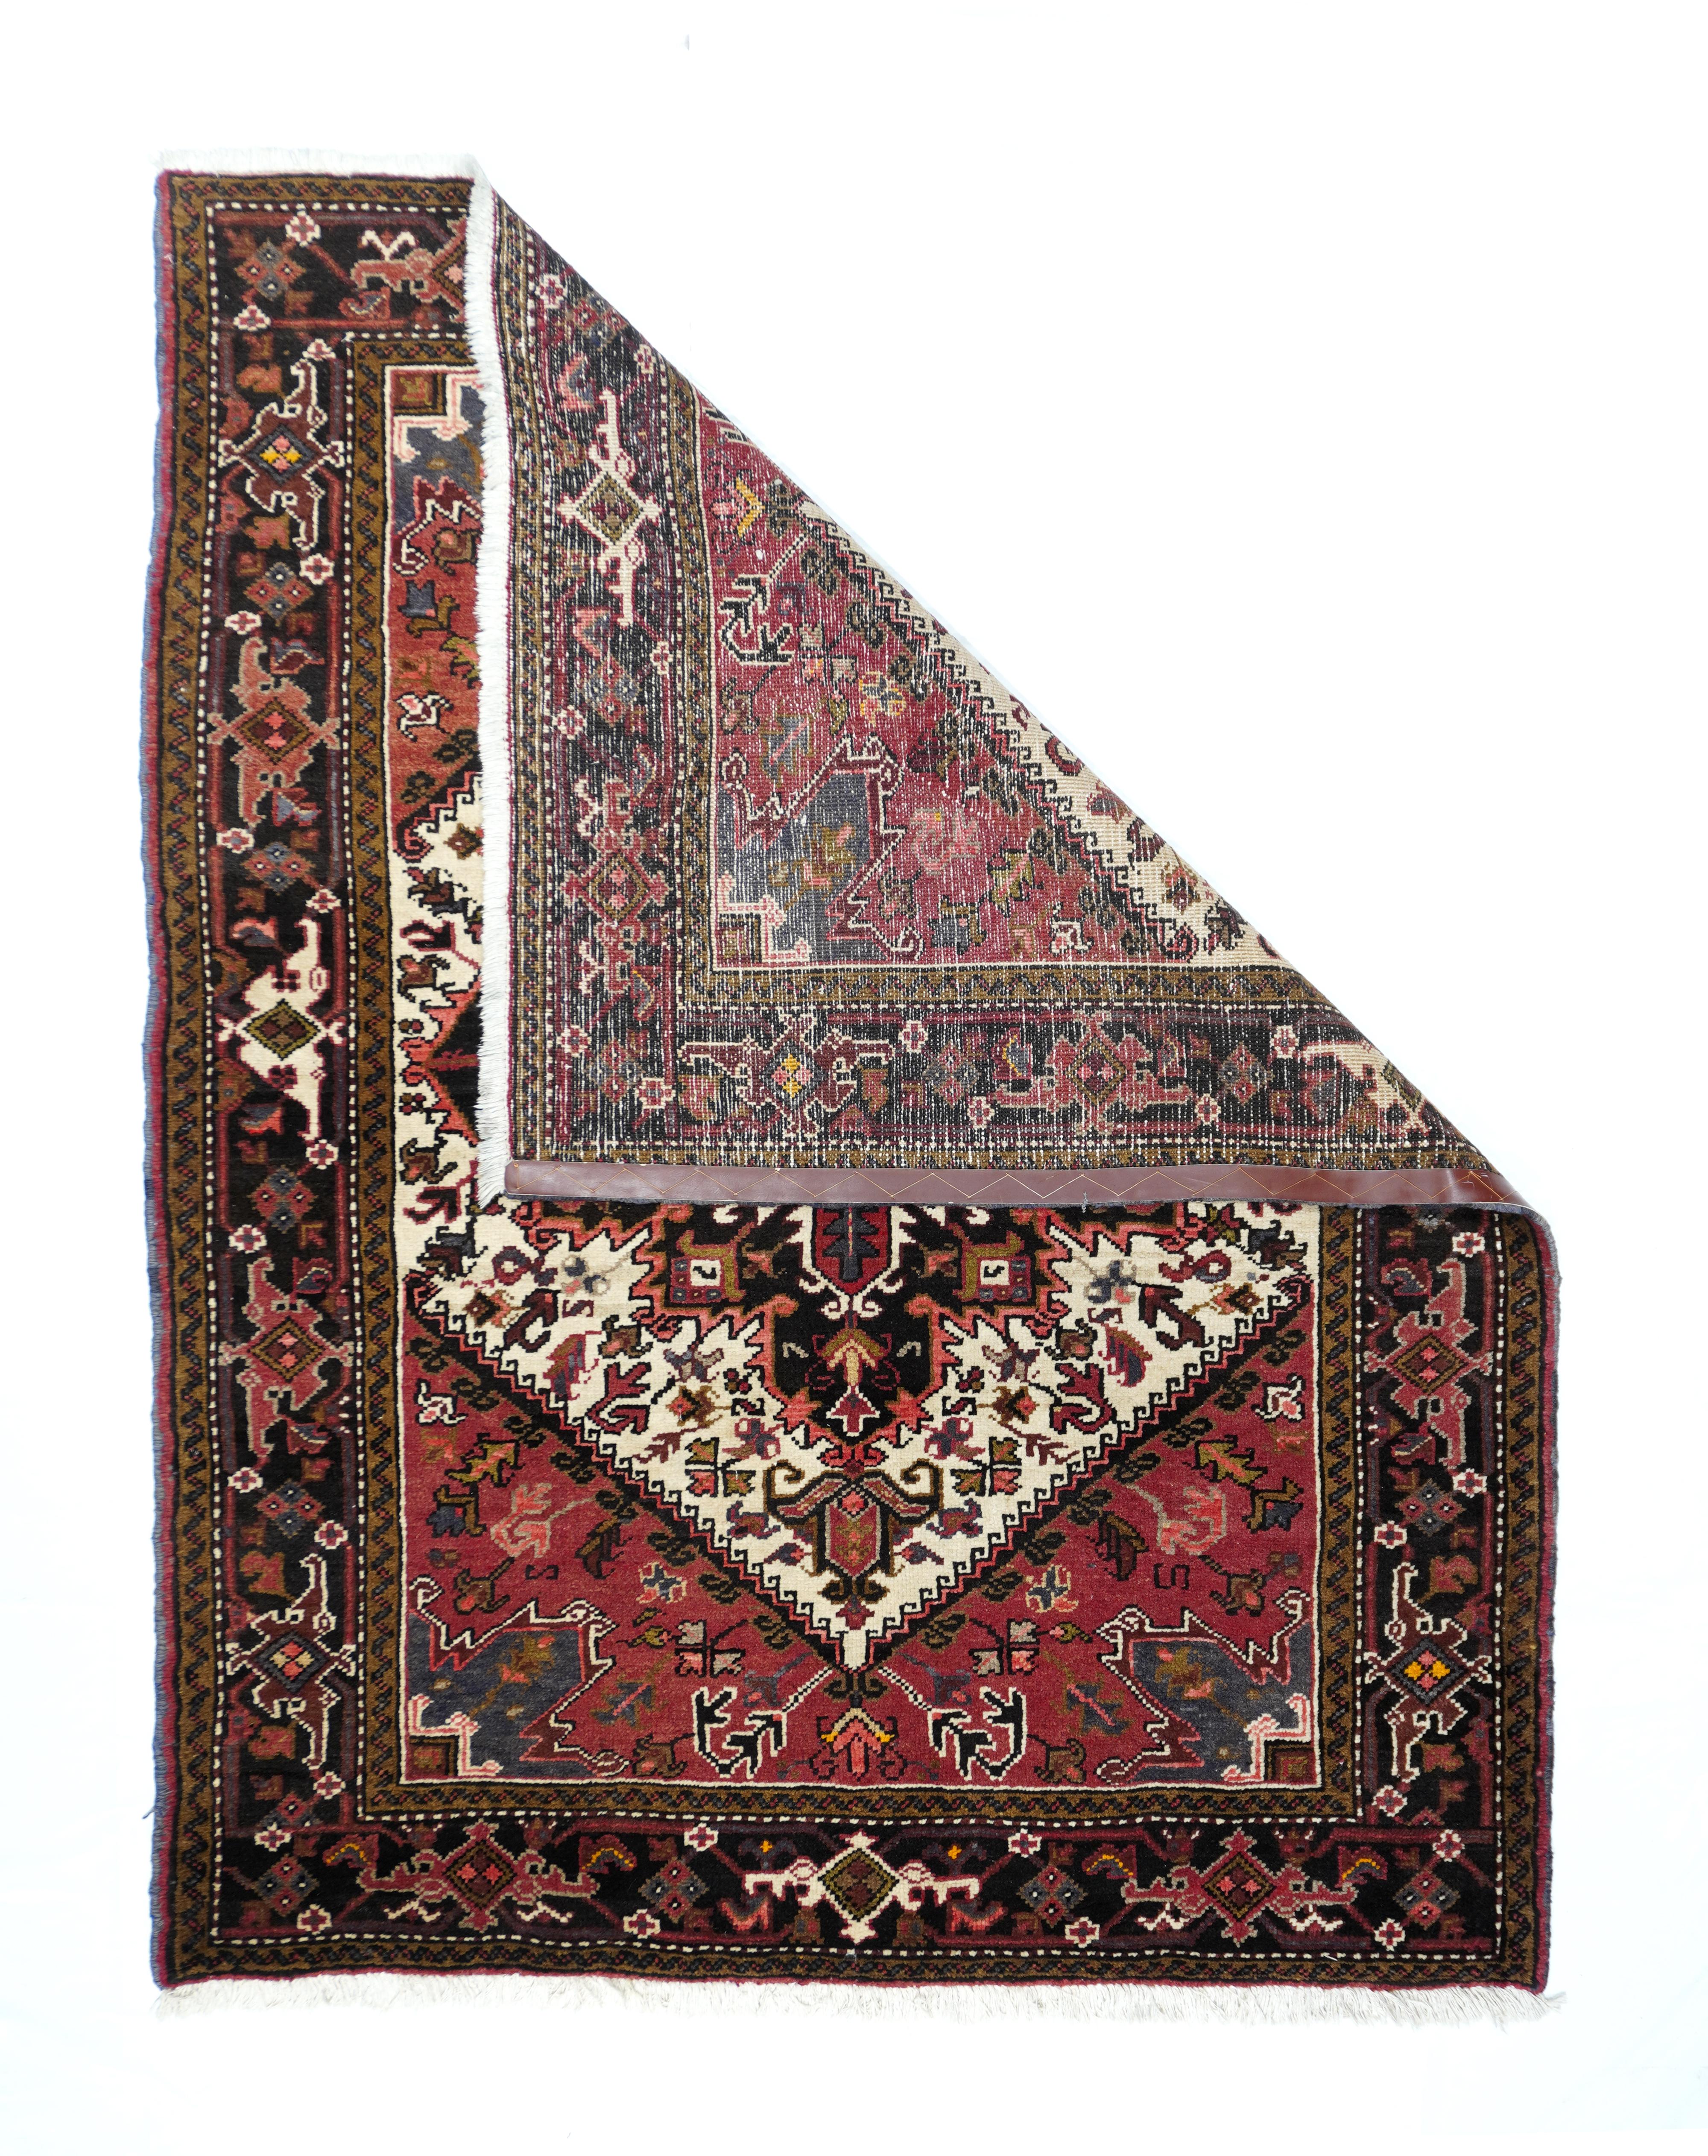 Vintage Heriz Rug 5' x 8'3''. The Heriz weaving district in NW Persia (Azerbaijan province) has been intensely active from the 18th century onward, with literally millions of mostly medallion, mostly room size carpets in a primarily red/ ecru and